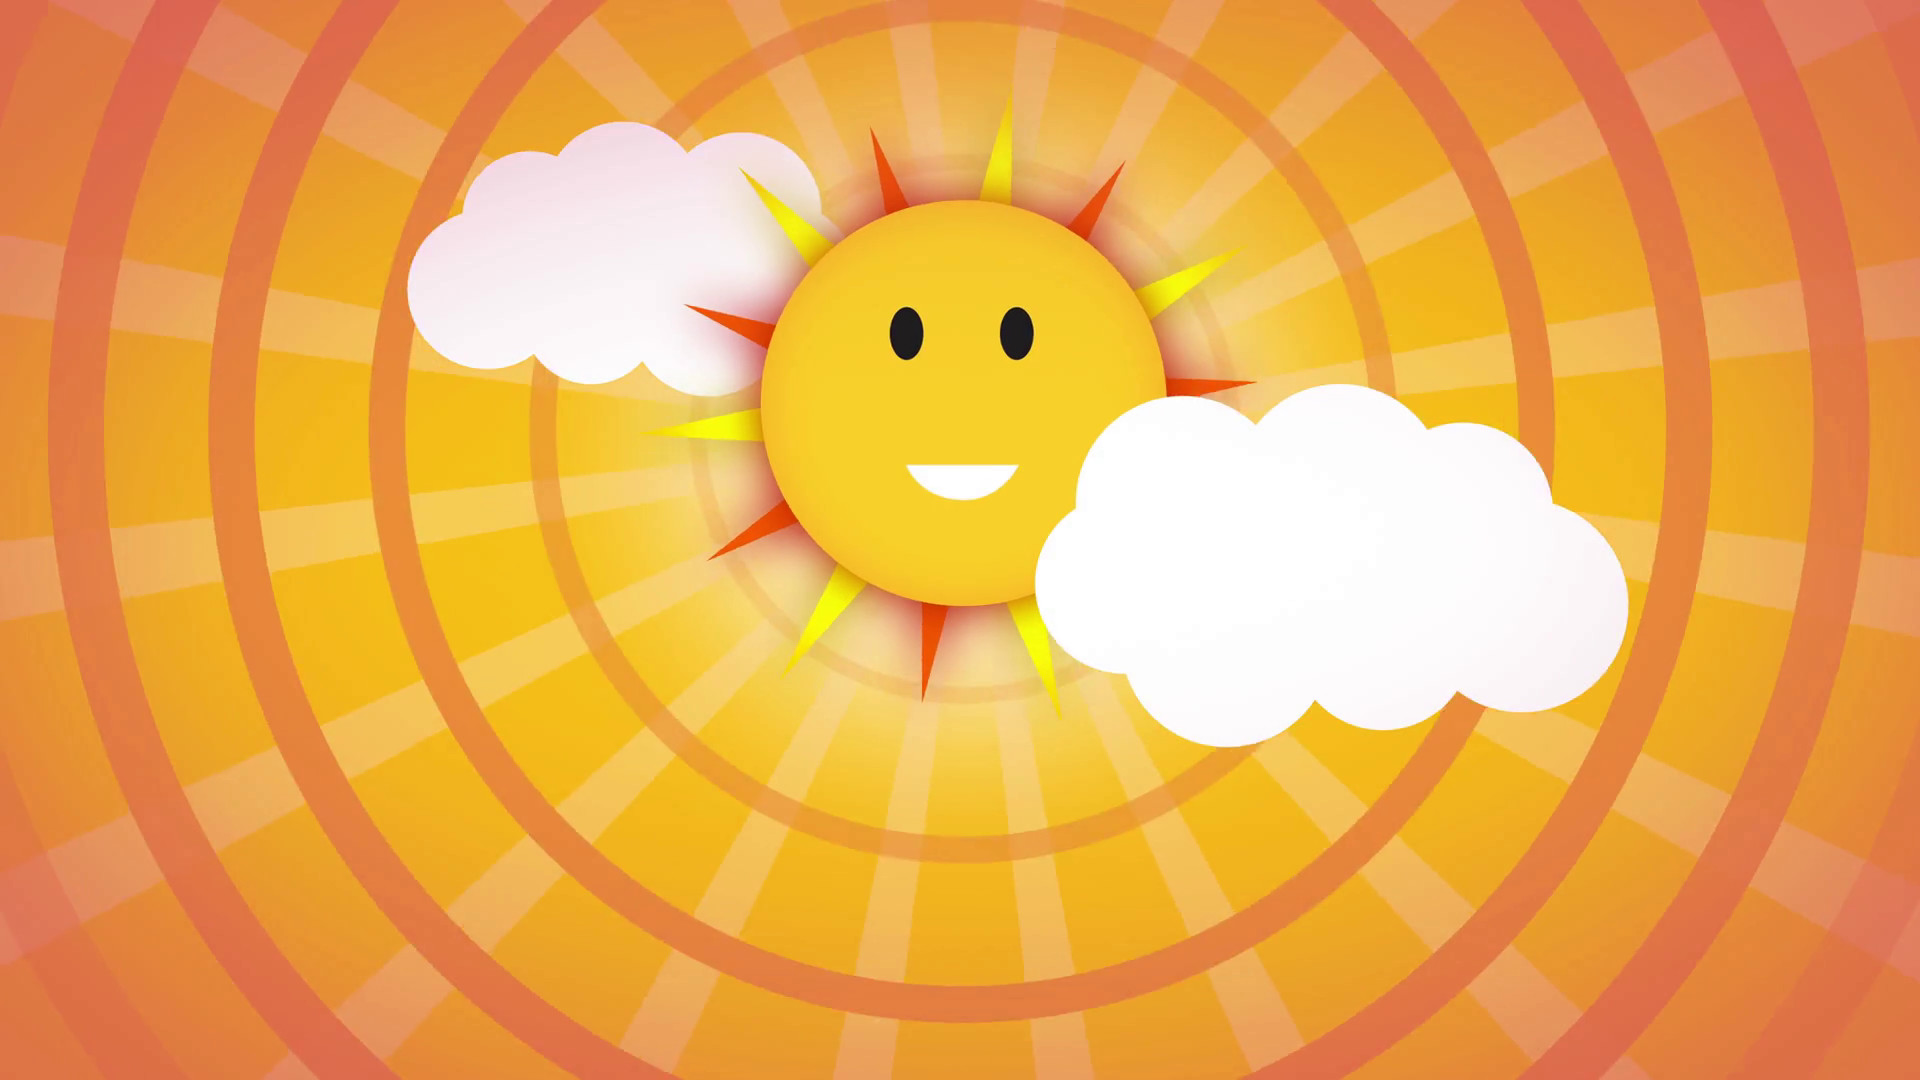 1920x1080 funny Cartoon smiling sun over yellow and orange sky with sunburst and some  clouds, animation of cute sun vs clouds loop with space for your text or  logo.